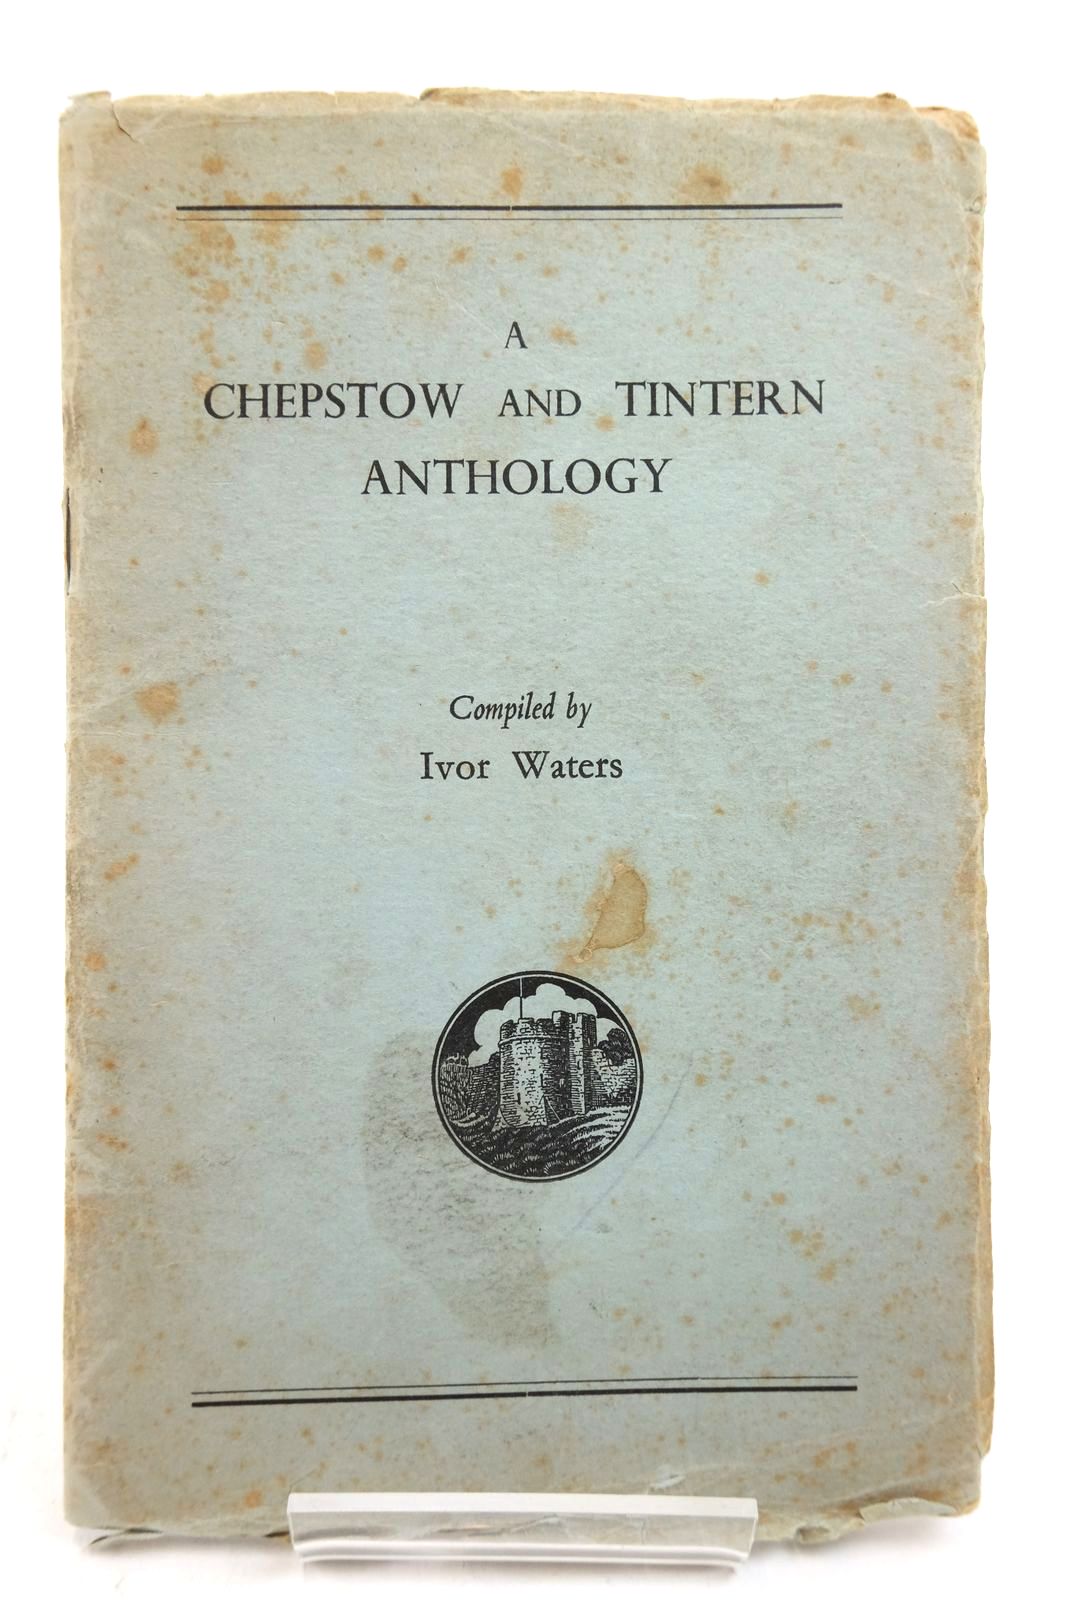 Photo of A CHEPSTOW AND TINTERN ANTHOLOGY written by Waters, Ivor illustrated by Birbeck, T.T. published by The Chepstow Society (STOCK CODE: 2140406)  for sale by Stella & Rose's Books